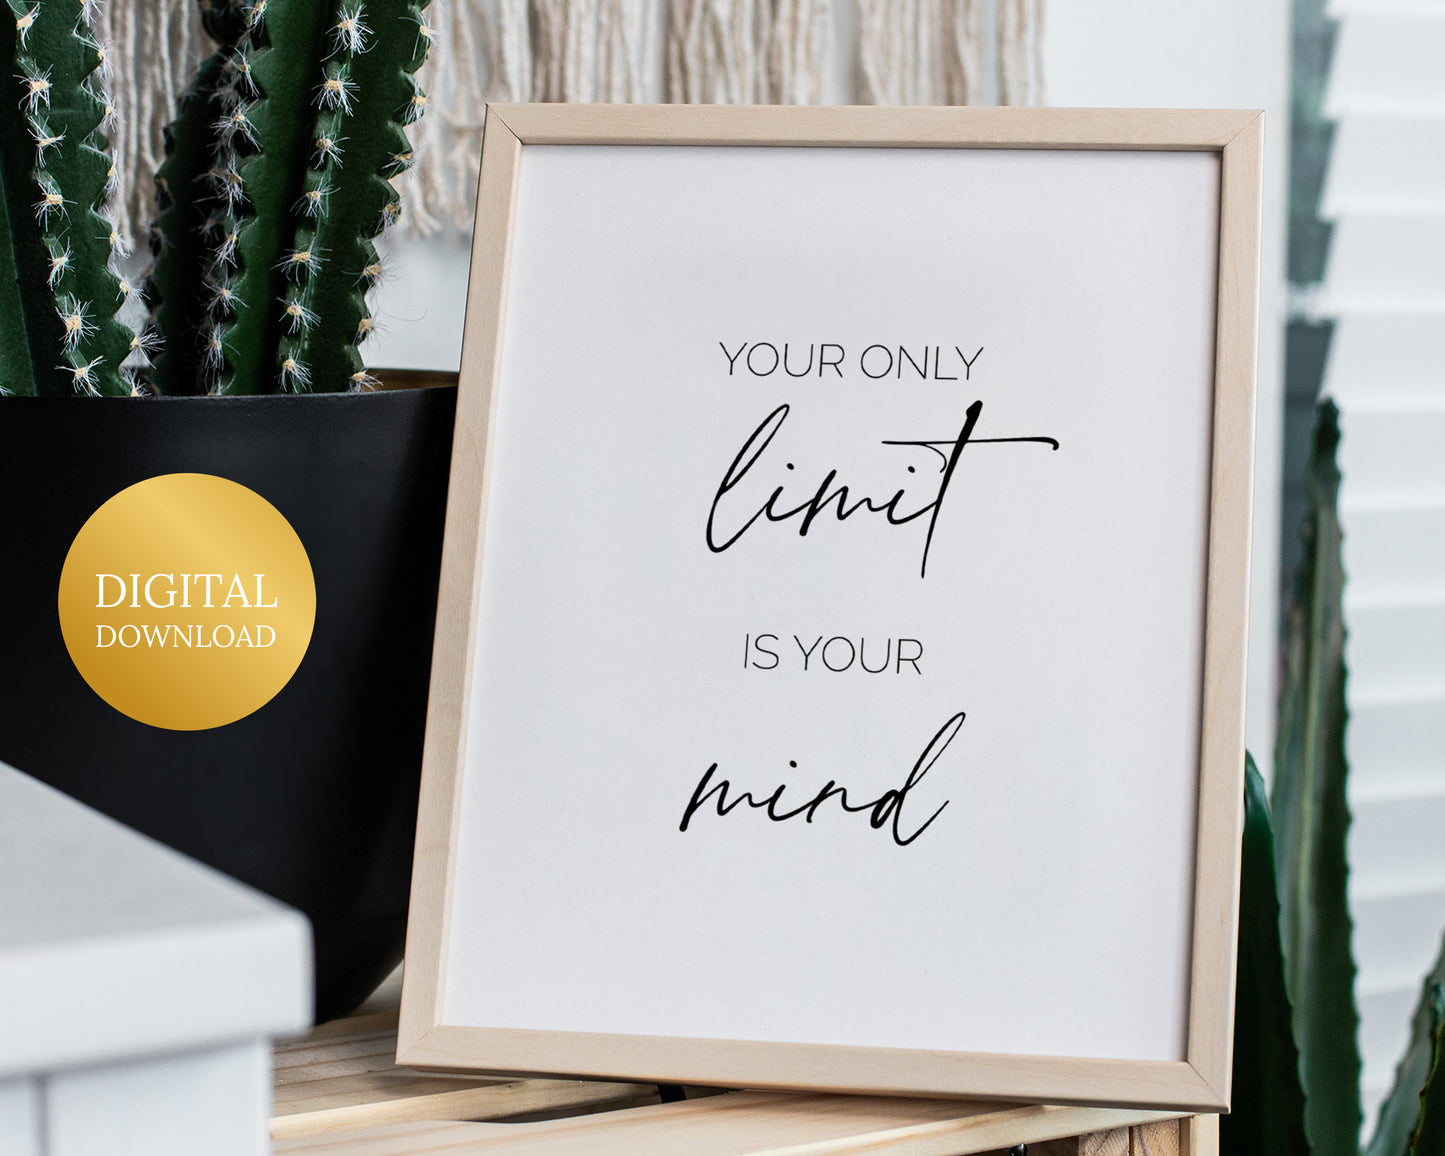 Printable office poster with powerful mindset quote